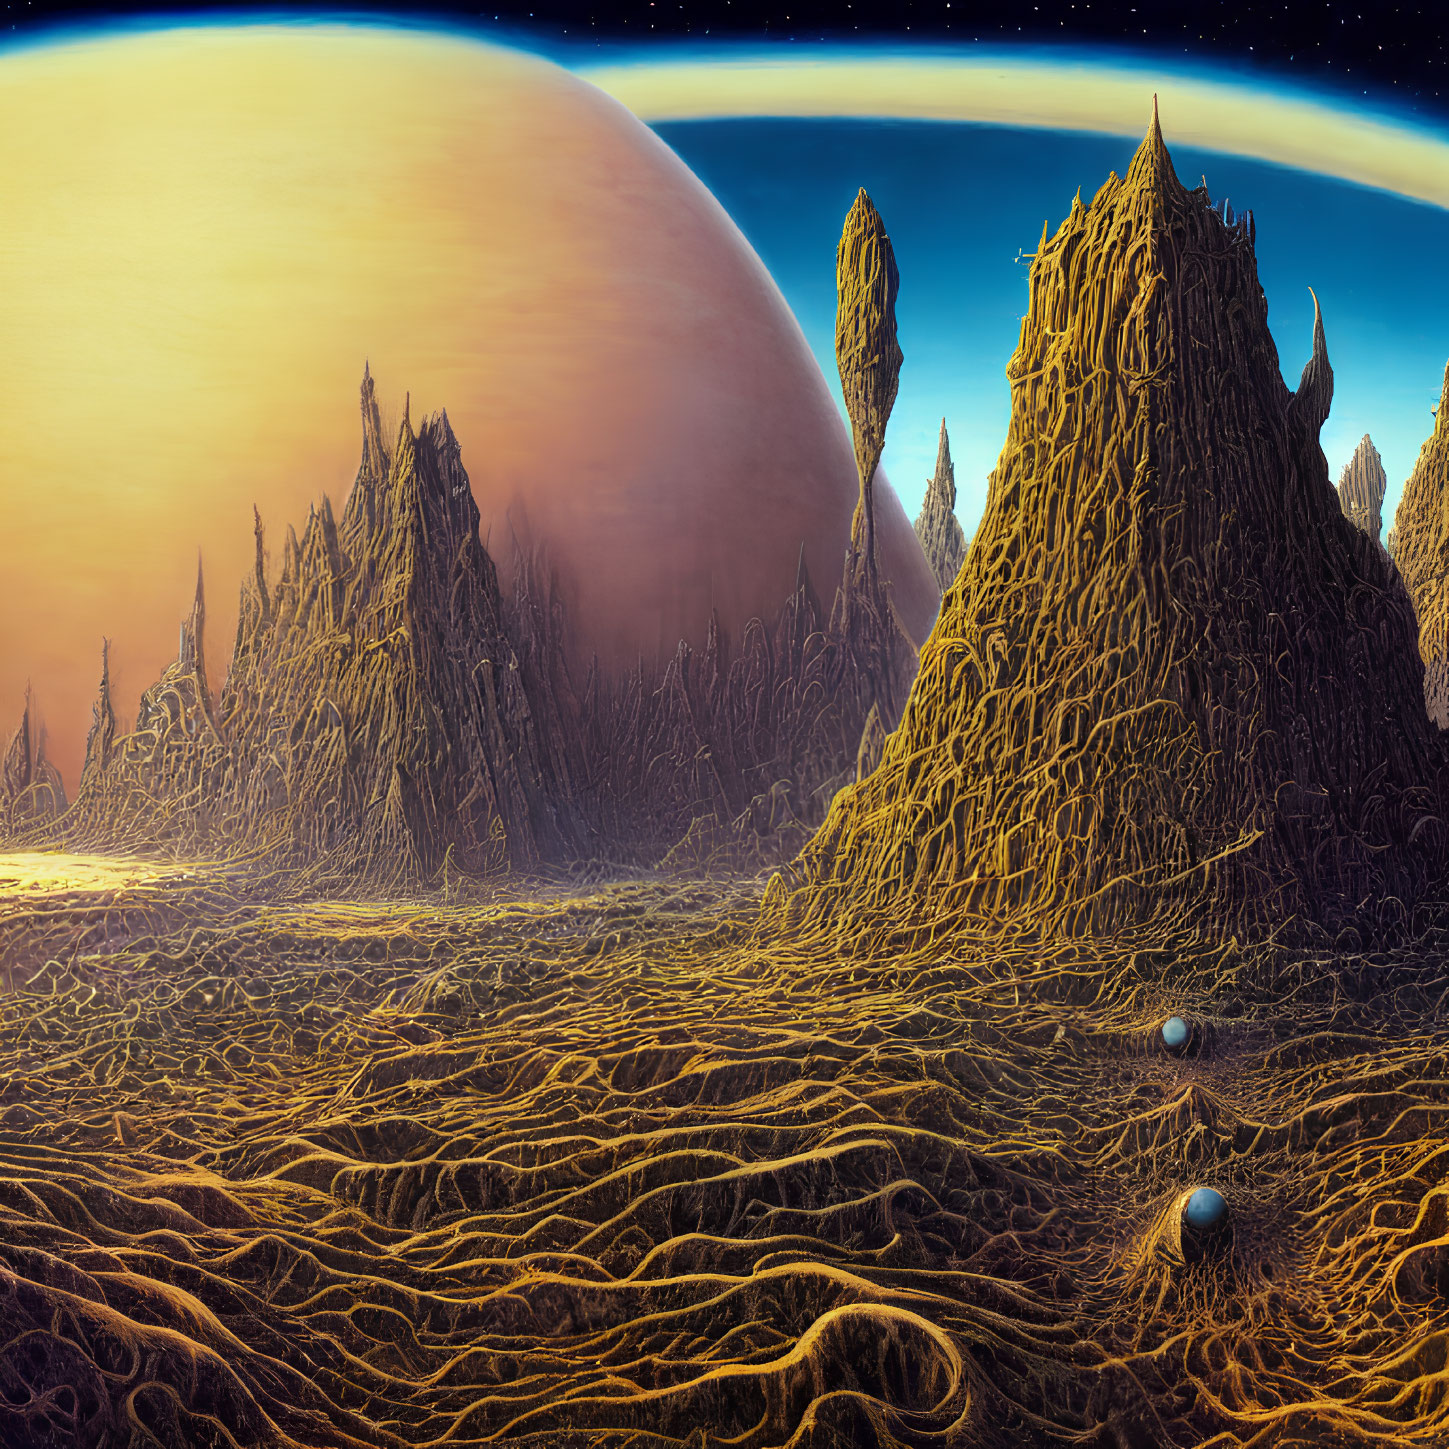 Surreal alien landscape with jagged rocks, large planet, and intricate patterns